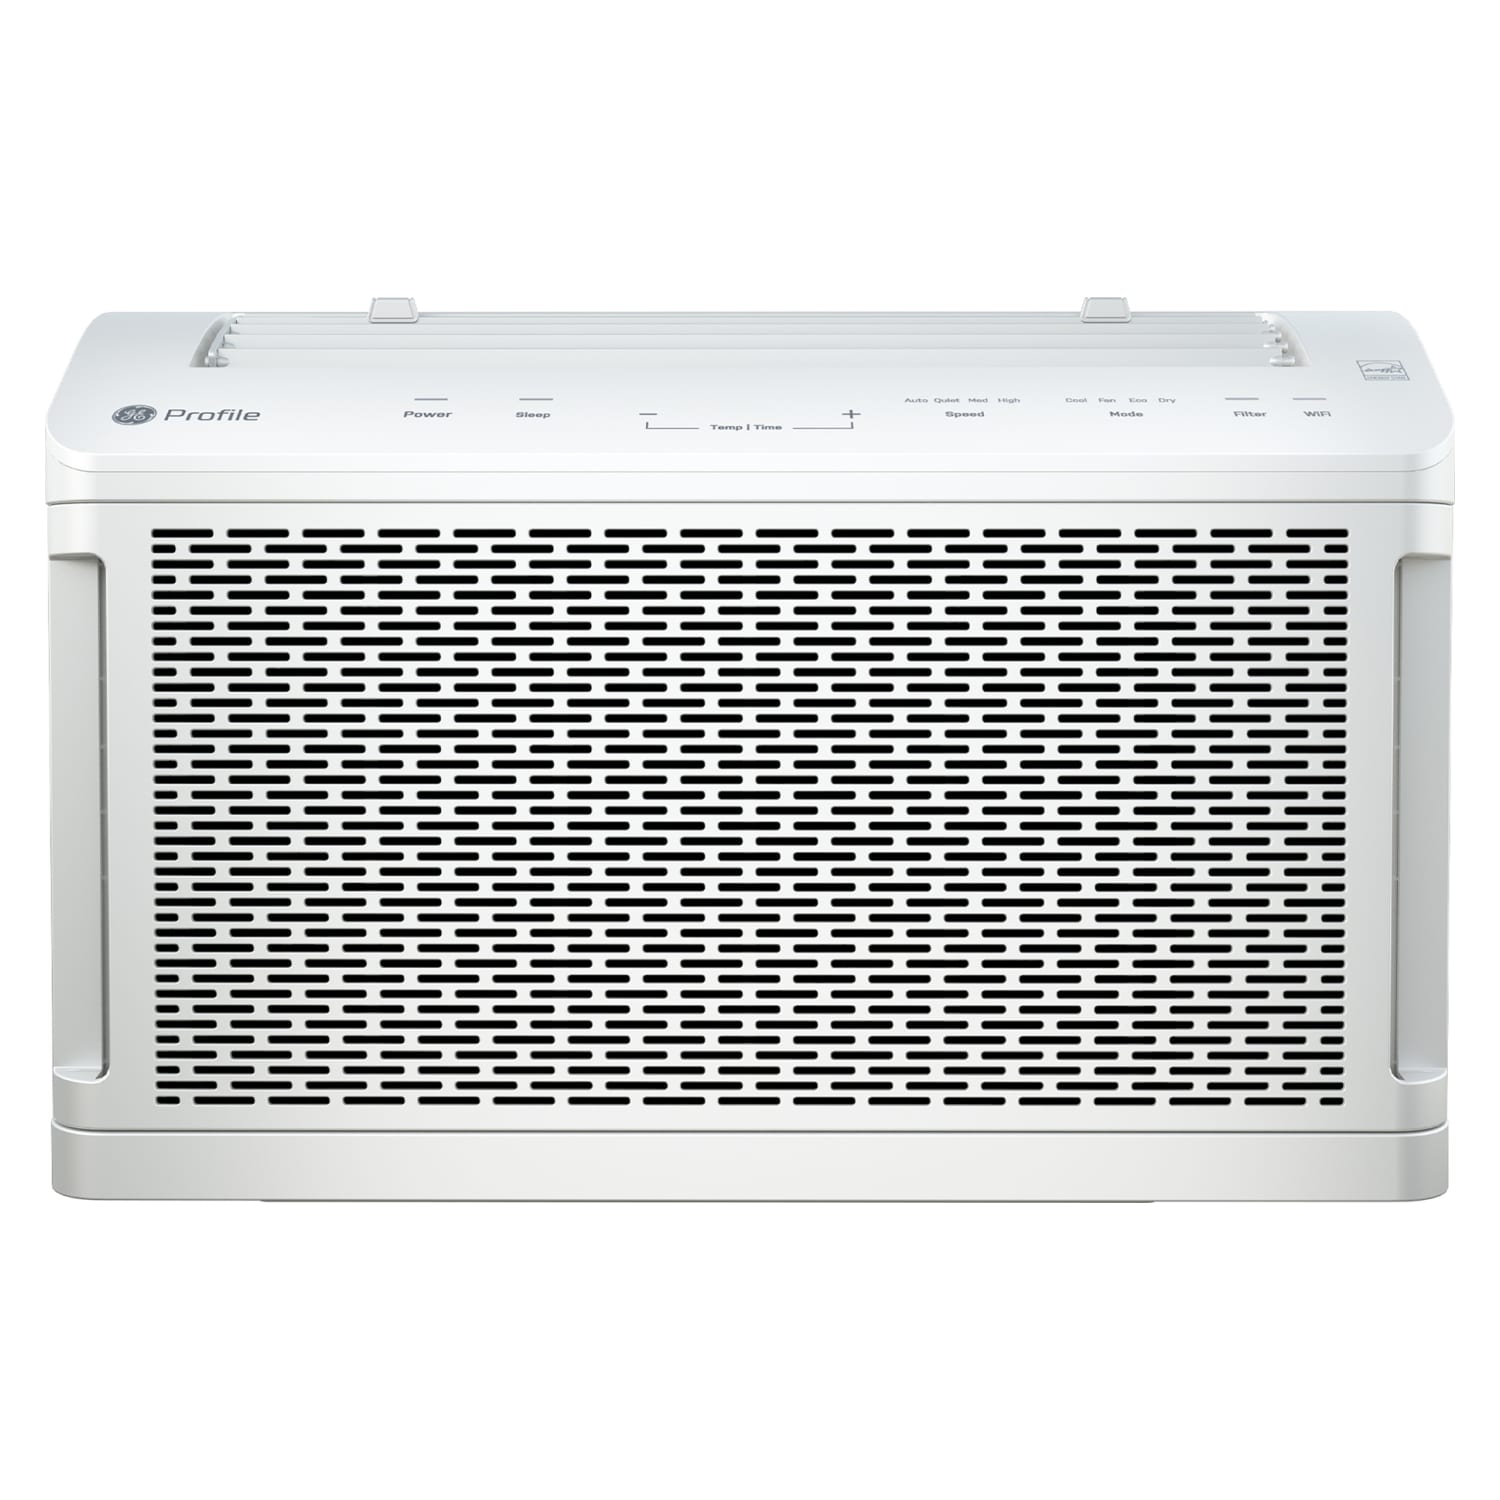 GE Profile ClearView 10,000 BTU Inverter Smart Ultra Quiet Window Air Conditioner for Medium Rooms up to 450 sq. ft.